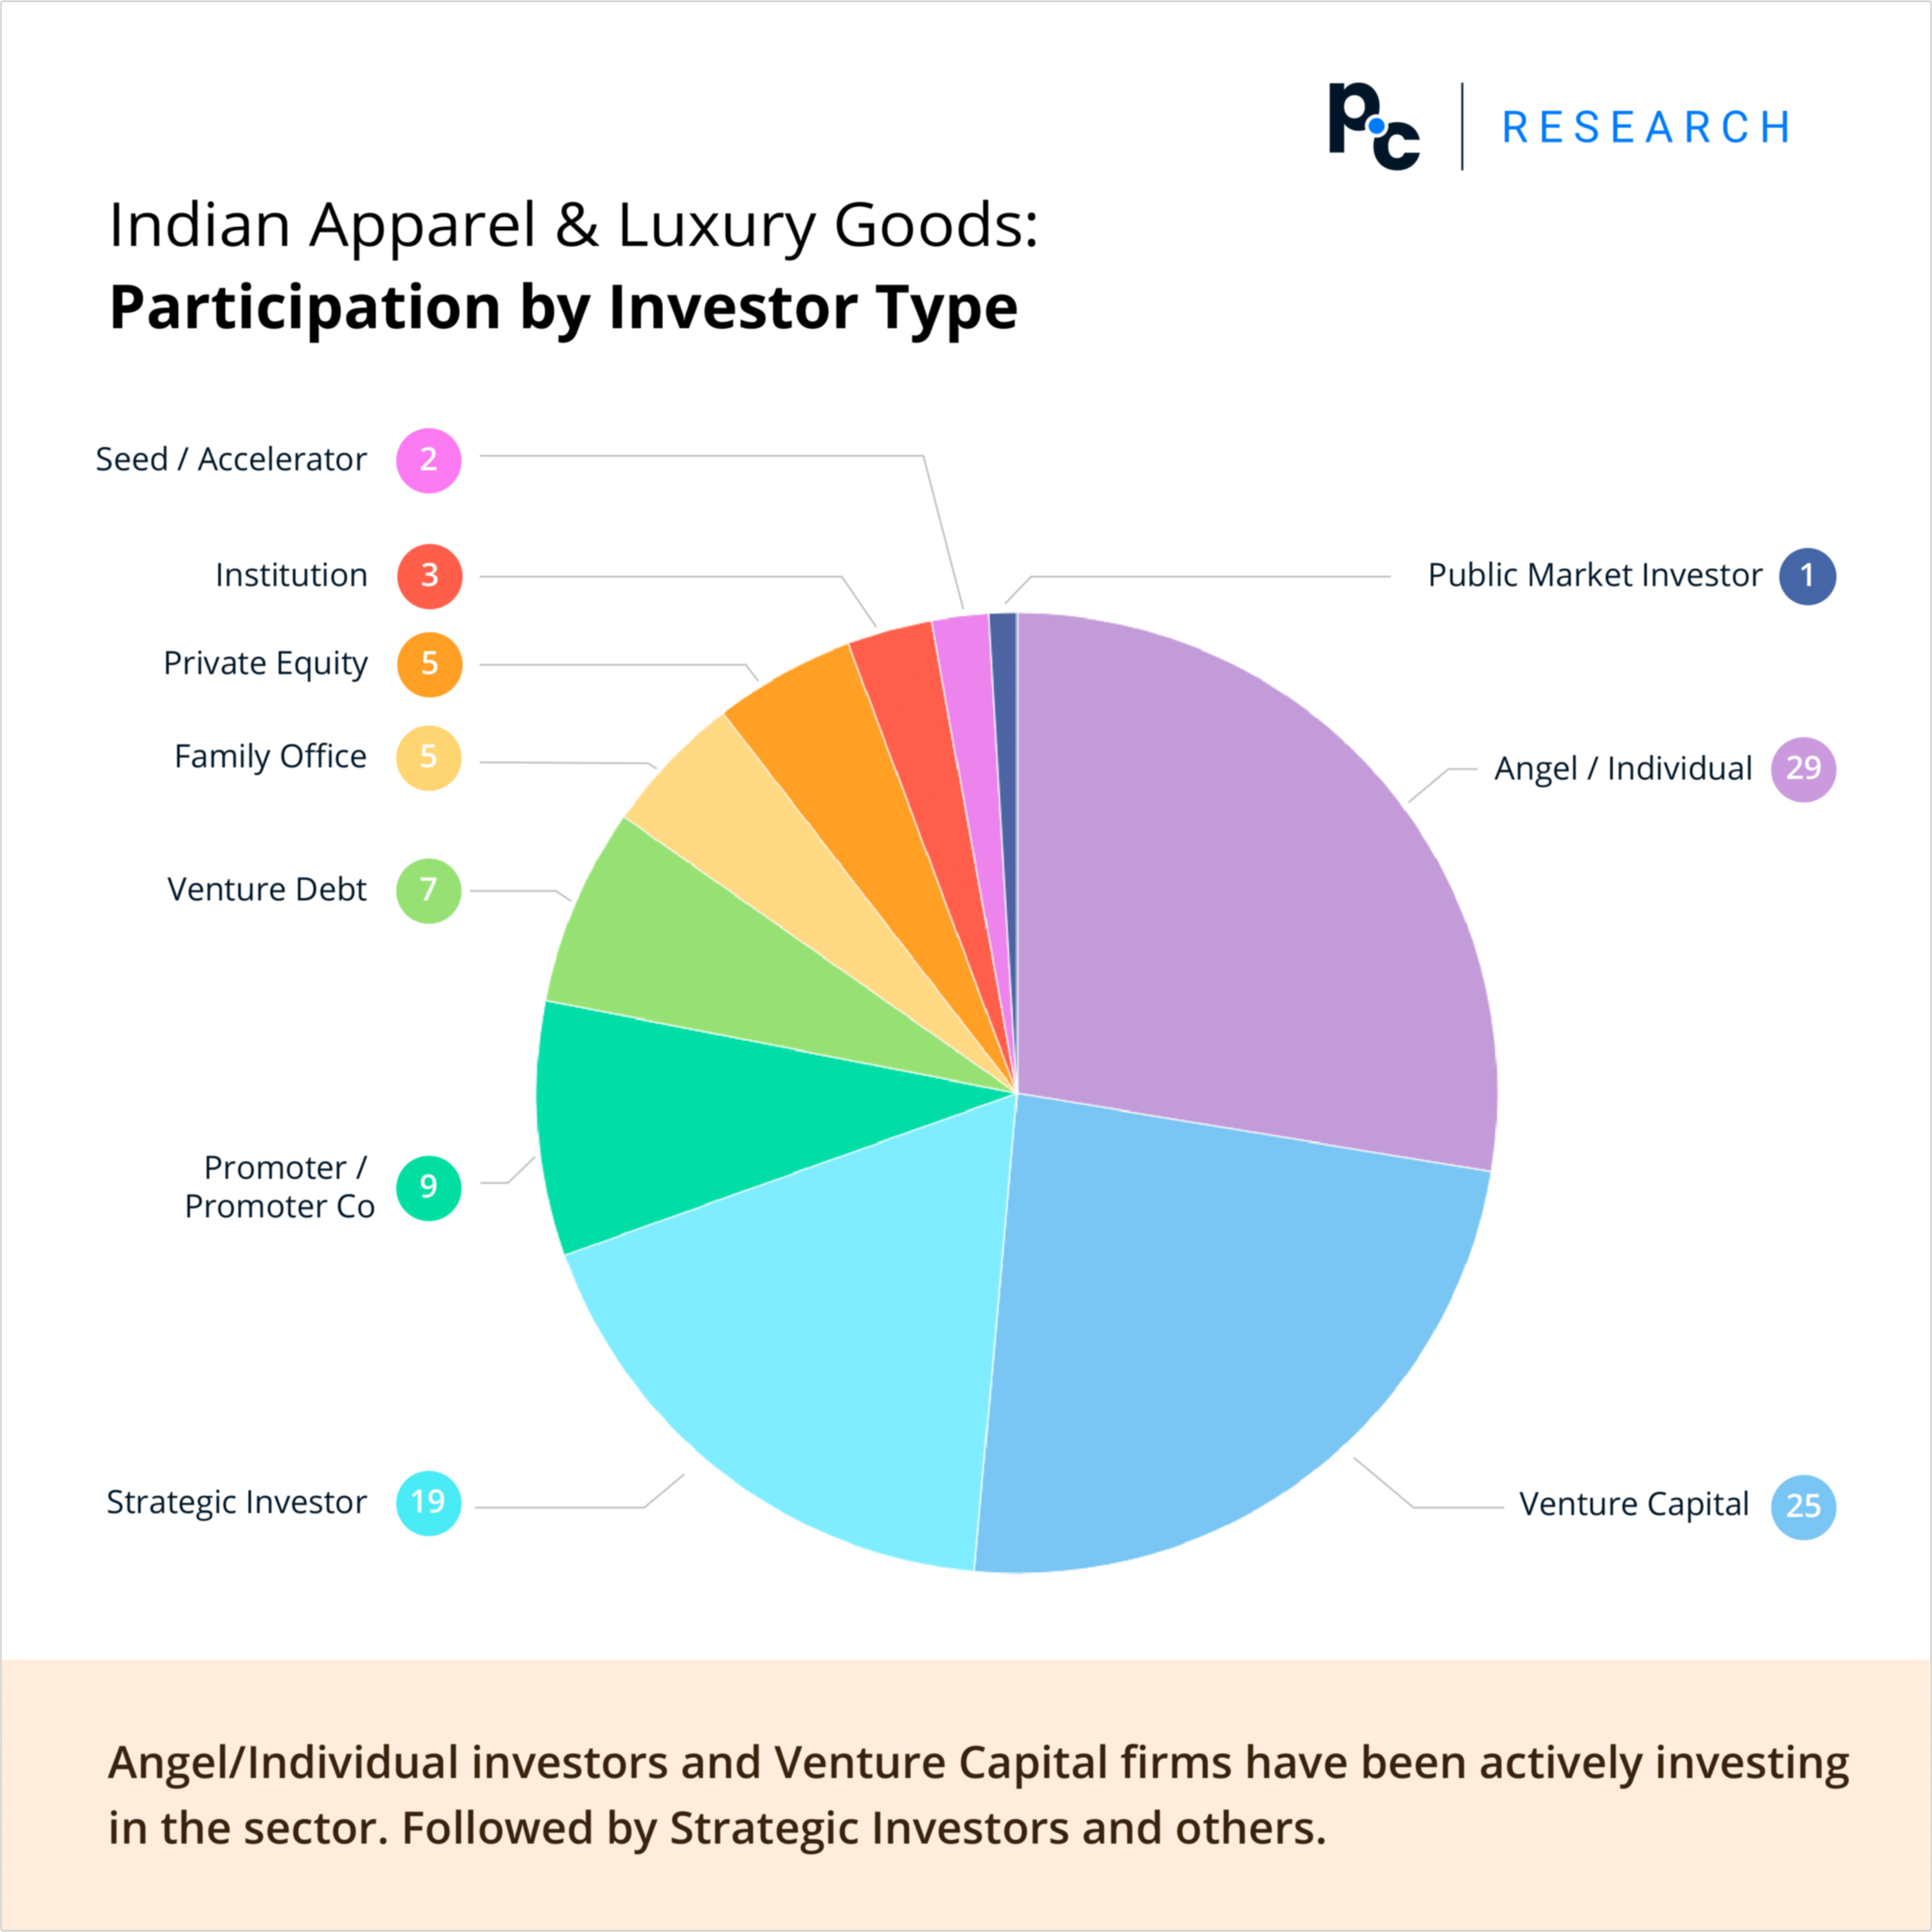 Indian Apparel & Luxury Goods: Participation by Investor Type.

Angel/Individual investors and Venture Capital firms have been actively investing in the sector. Followed by Strategic Investors and others.